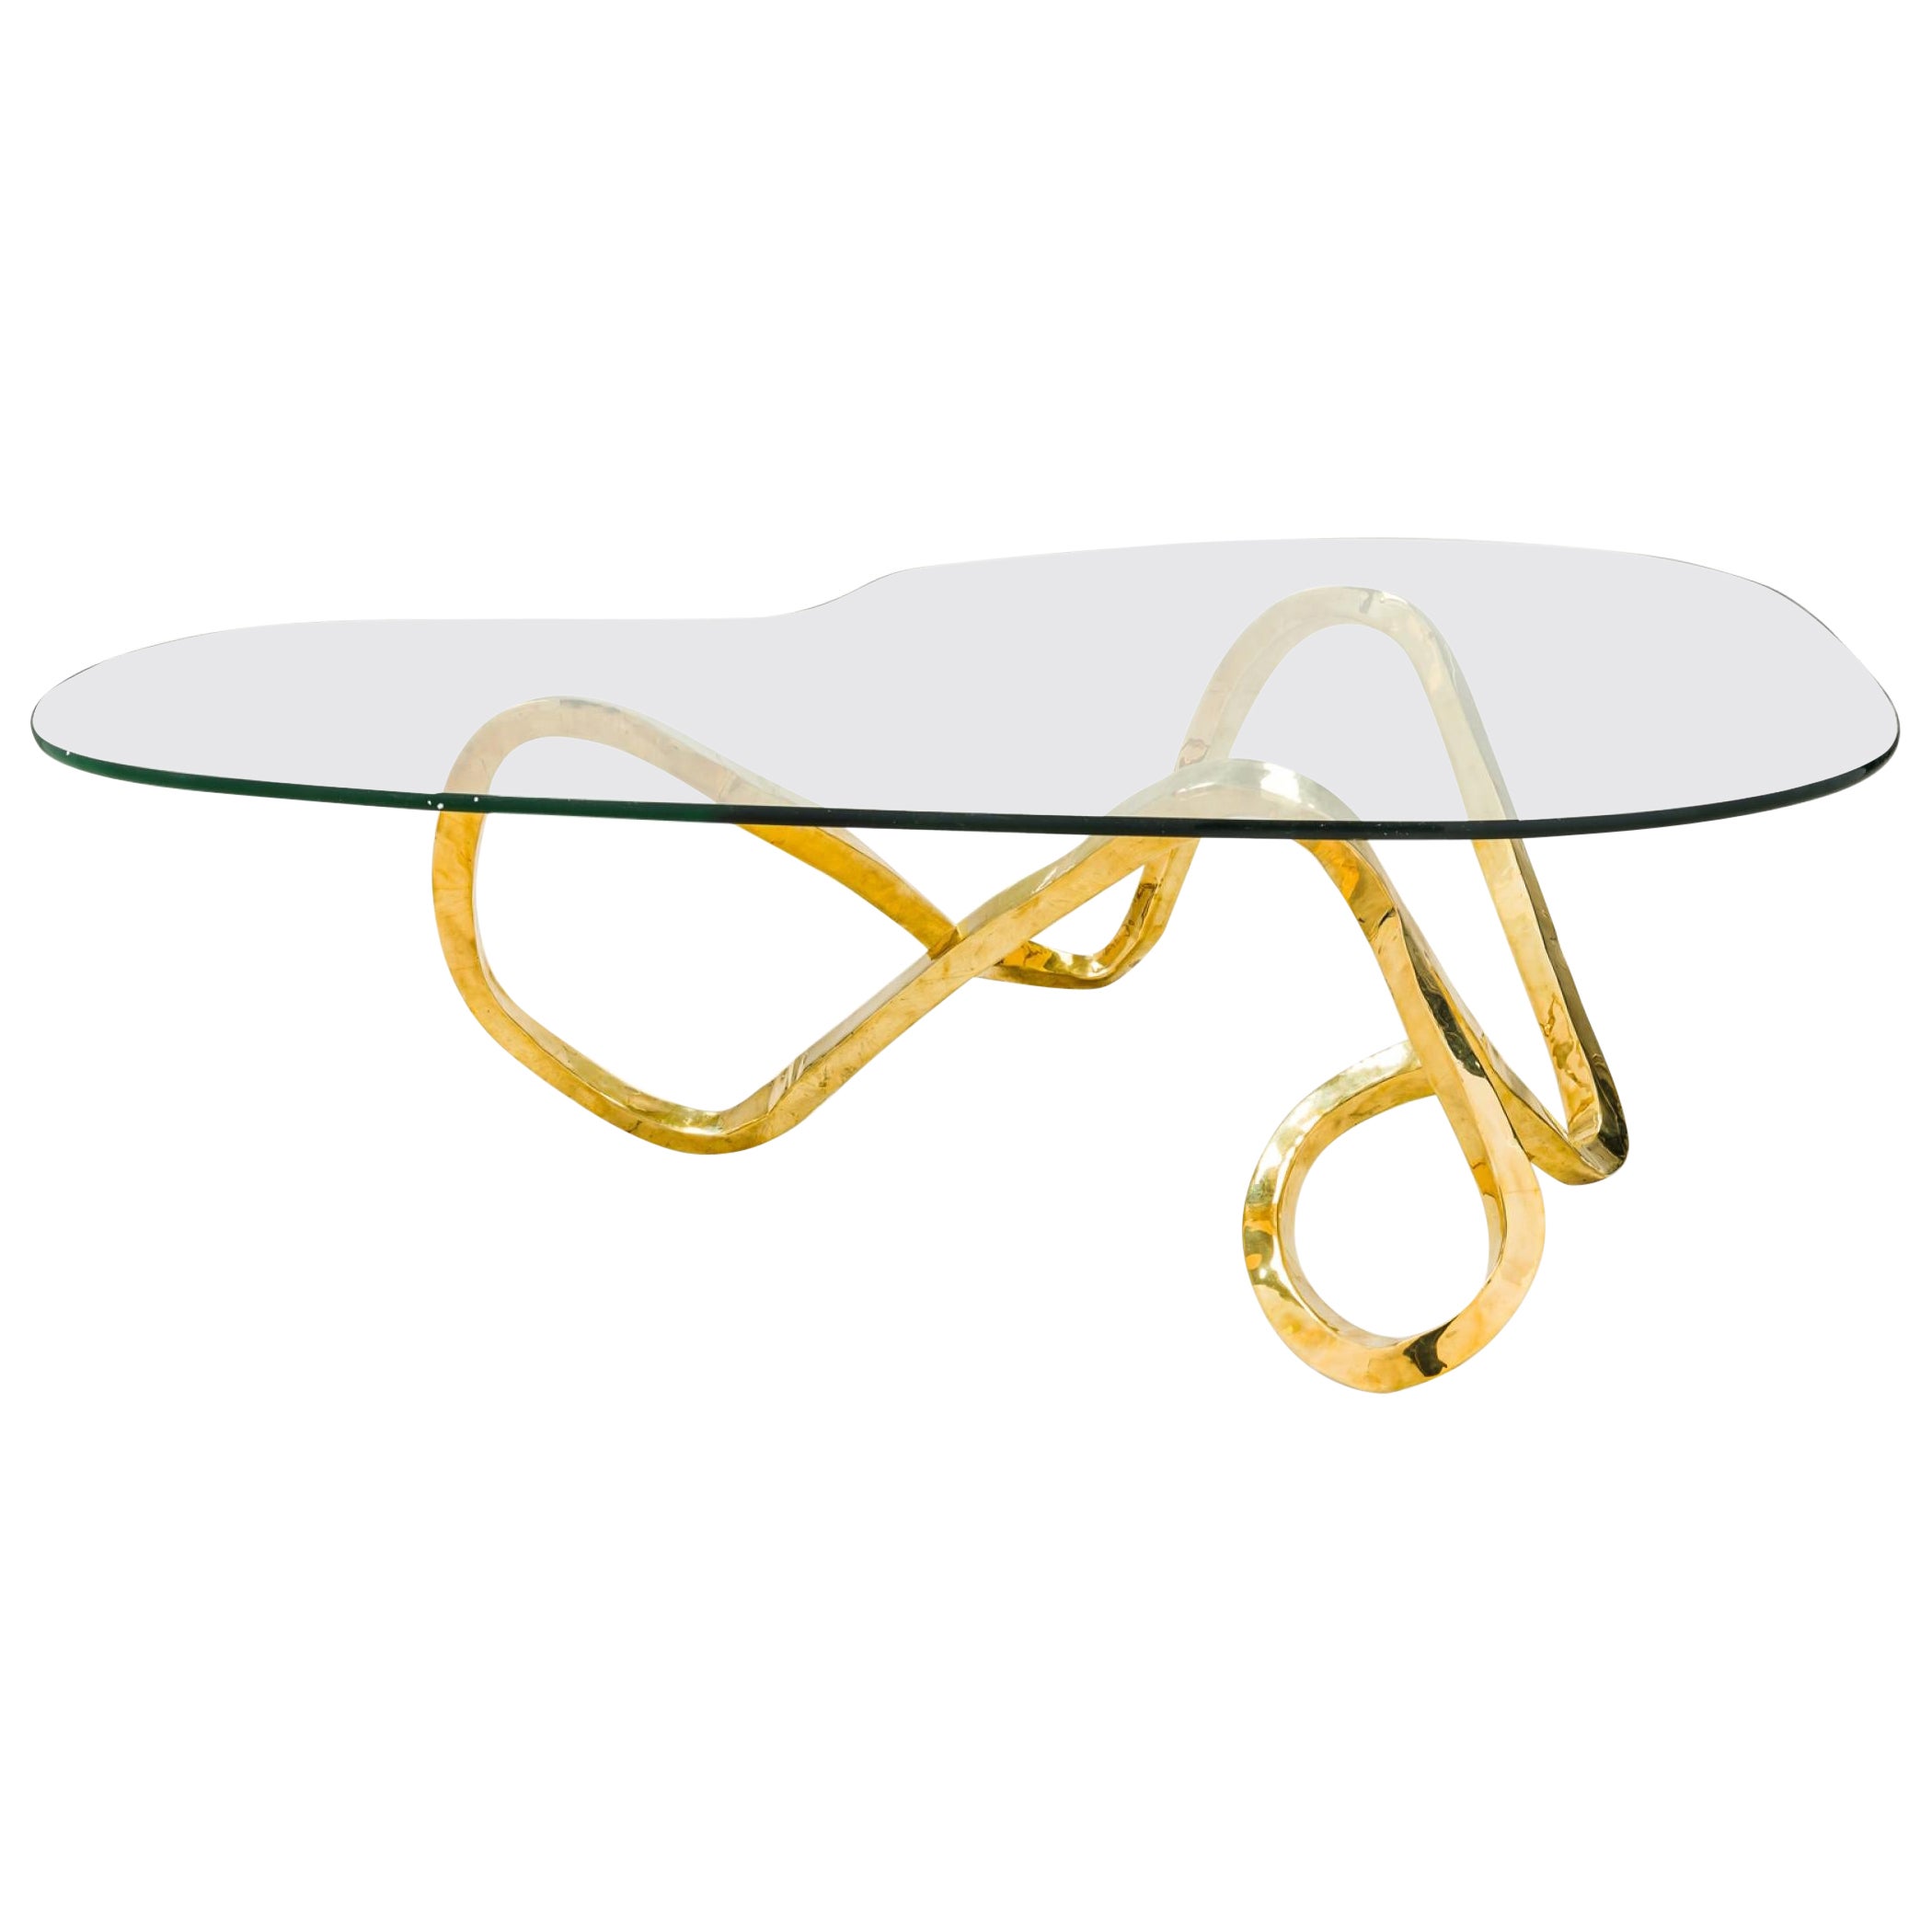 "Porto" Organic Loop Design Polished Bronze and Glass Coffee Tables For Sale